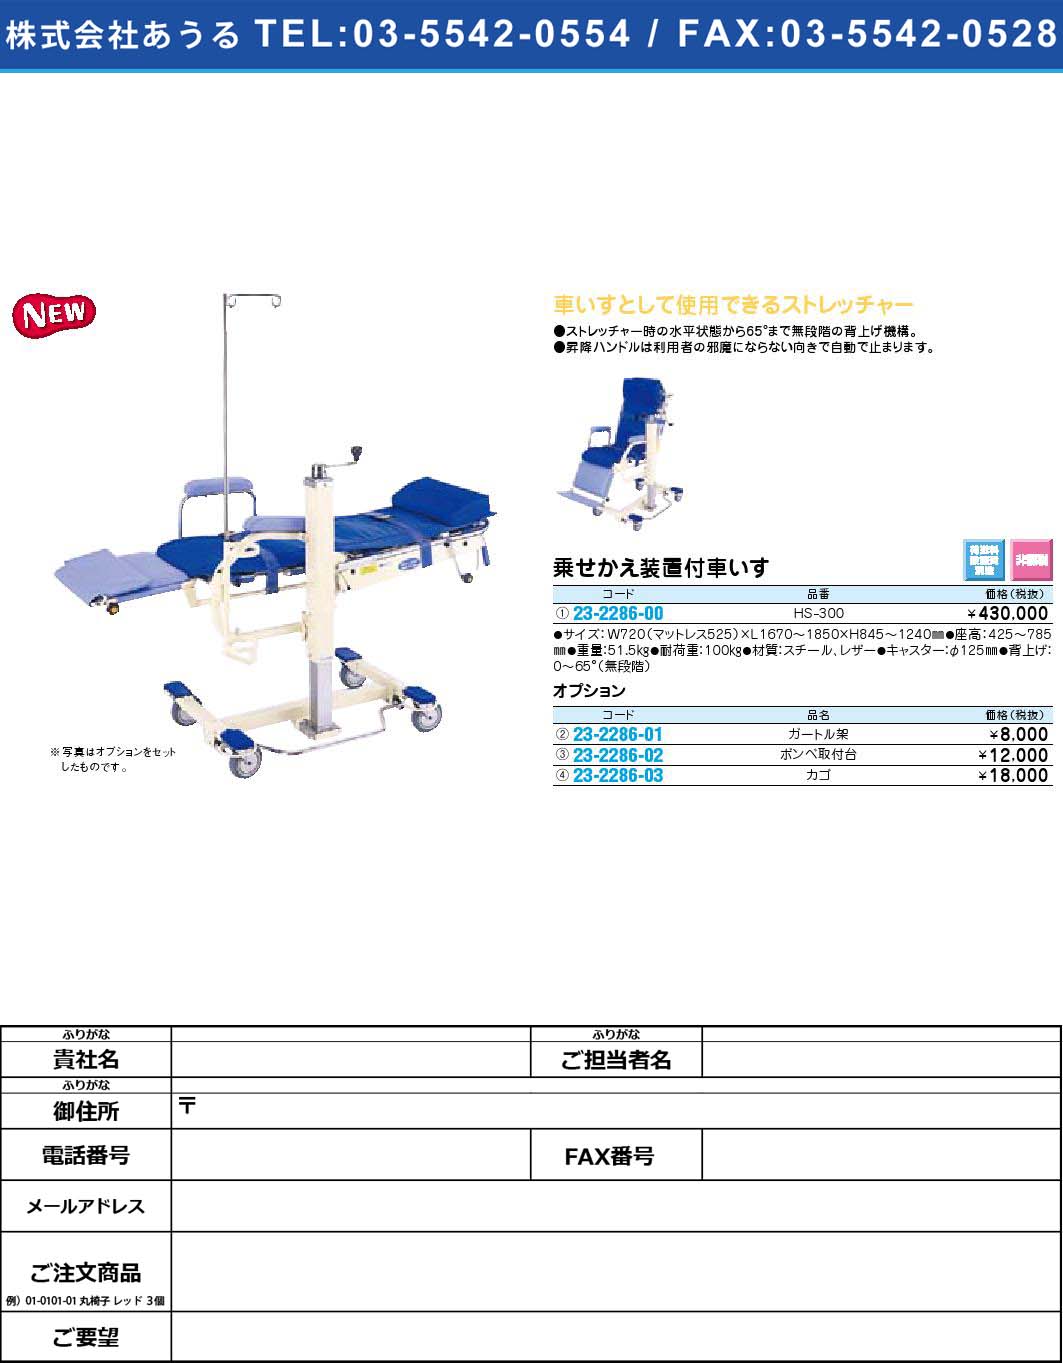 ★NEW!【荷送料設置費別途】【非課税】乗せかえ装置付車いす HS-300【1単位】(23-2286-00)